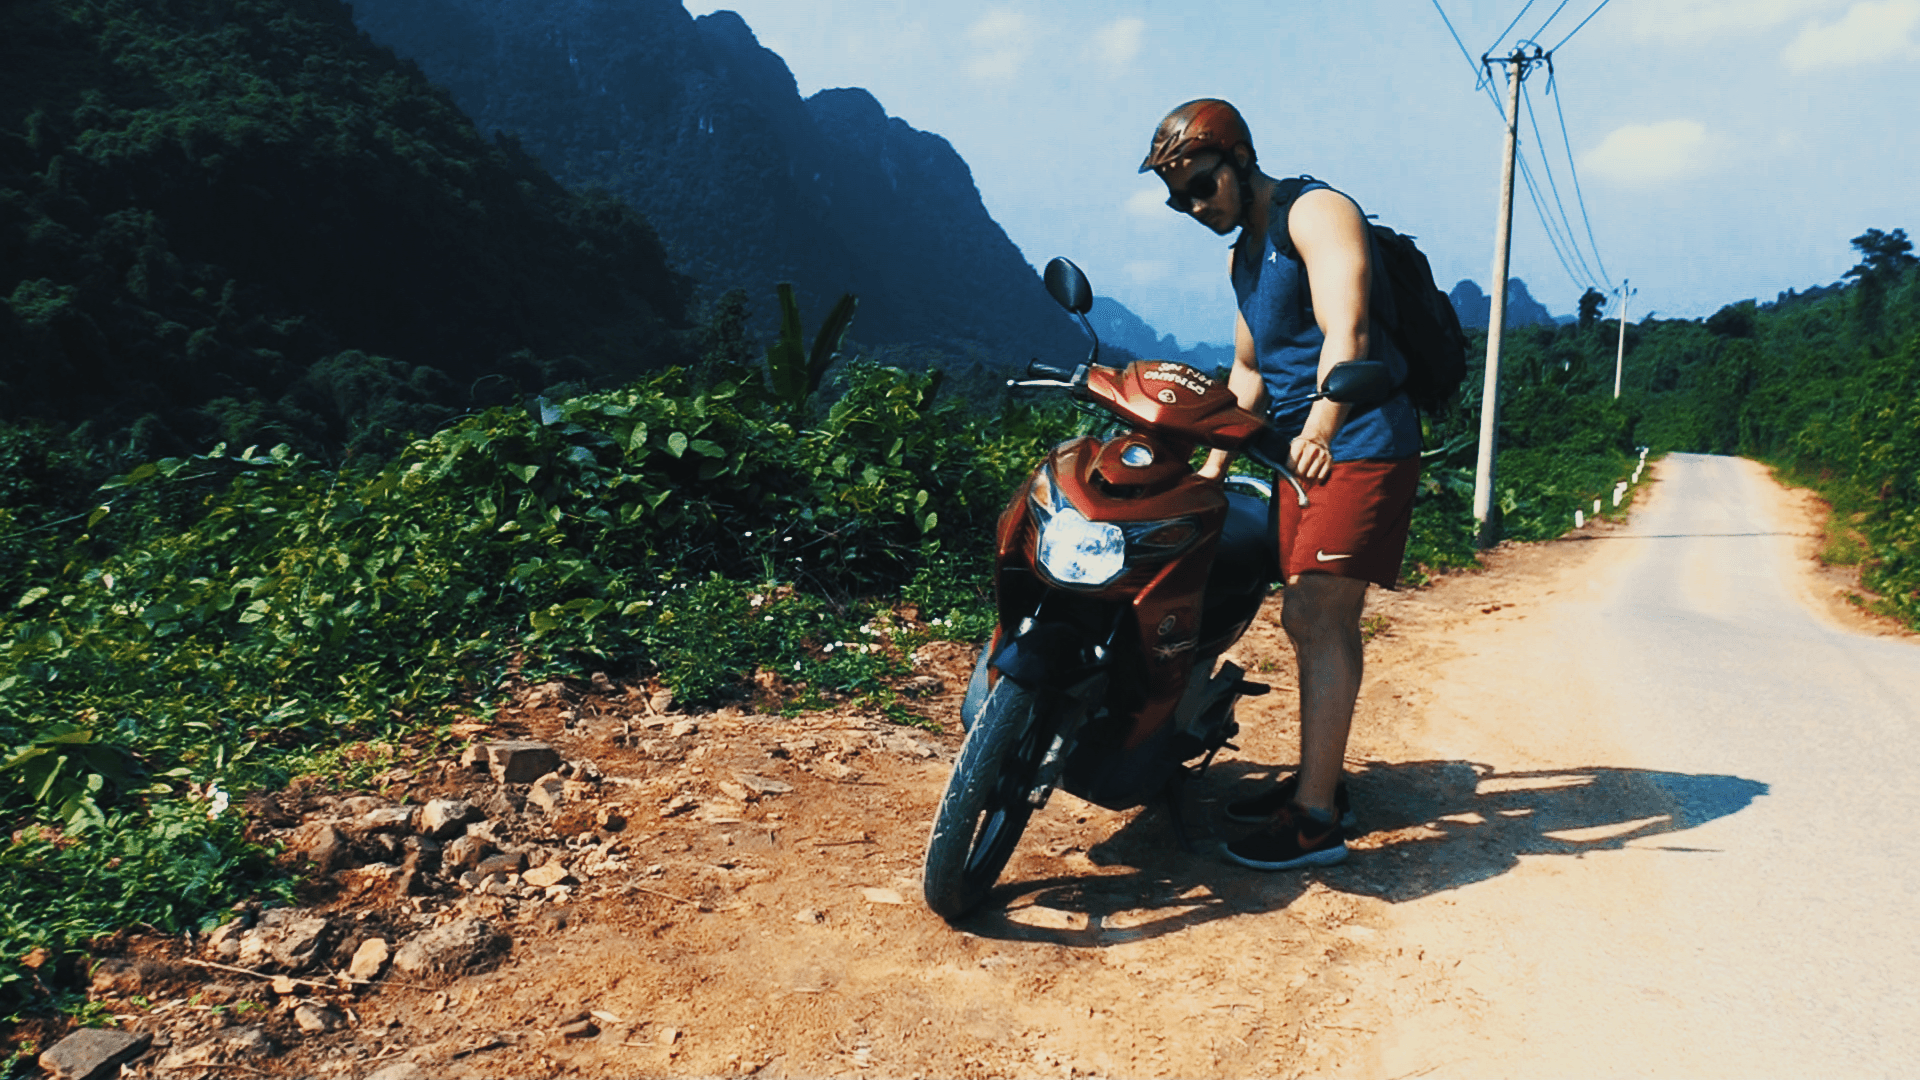 Trains, busses, ferries, motorbikes... There are plenty of ways to get around in Vietnam. Find the optimal means of transportation for your needs with this comprehensive guide. - Some Place Elsewhere